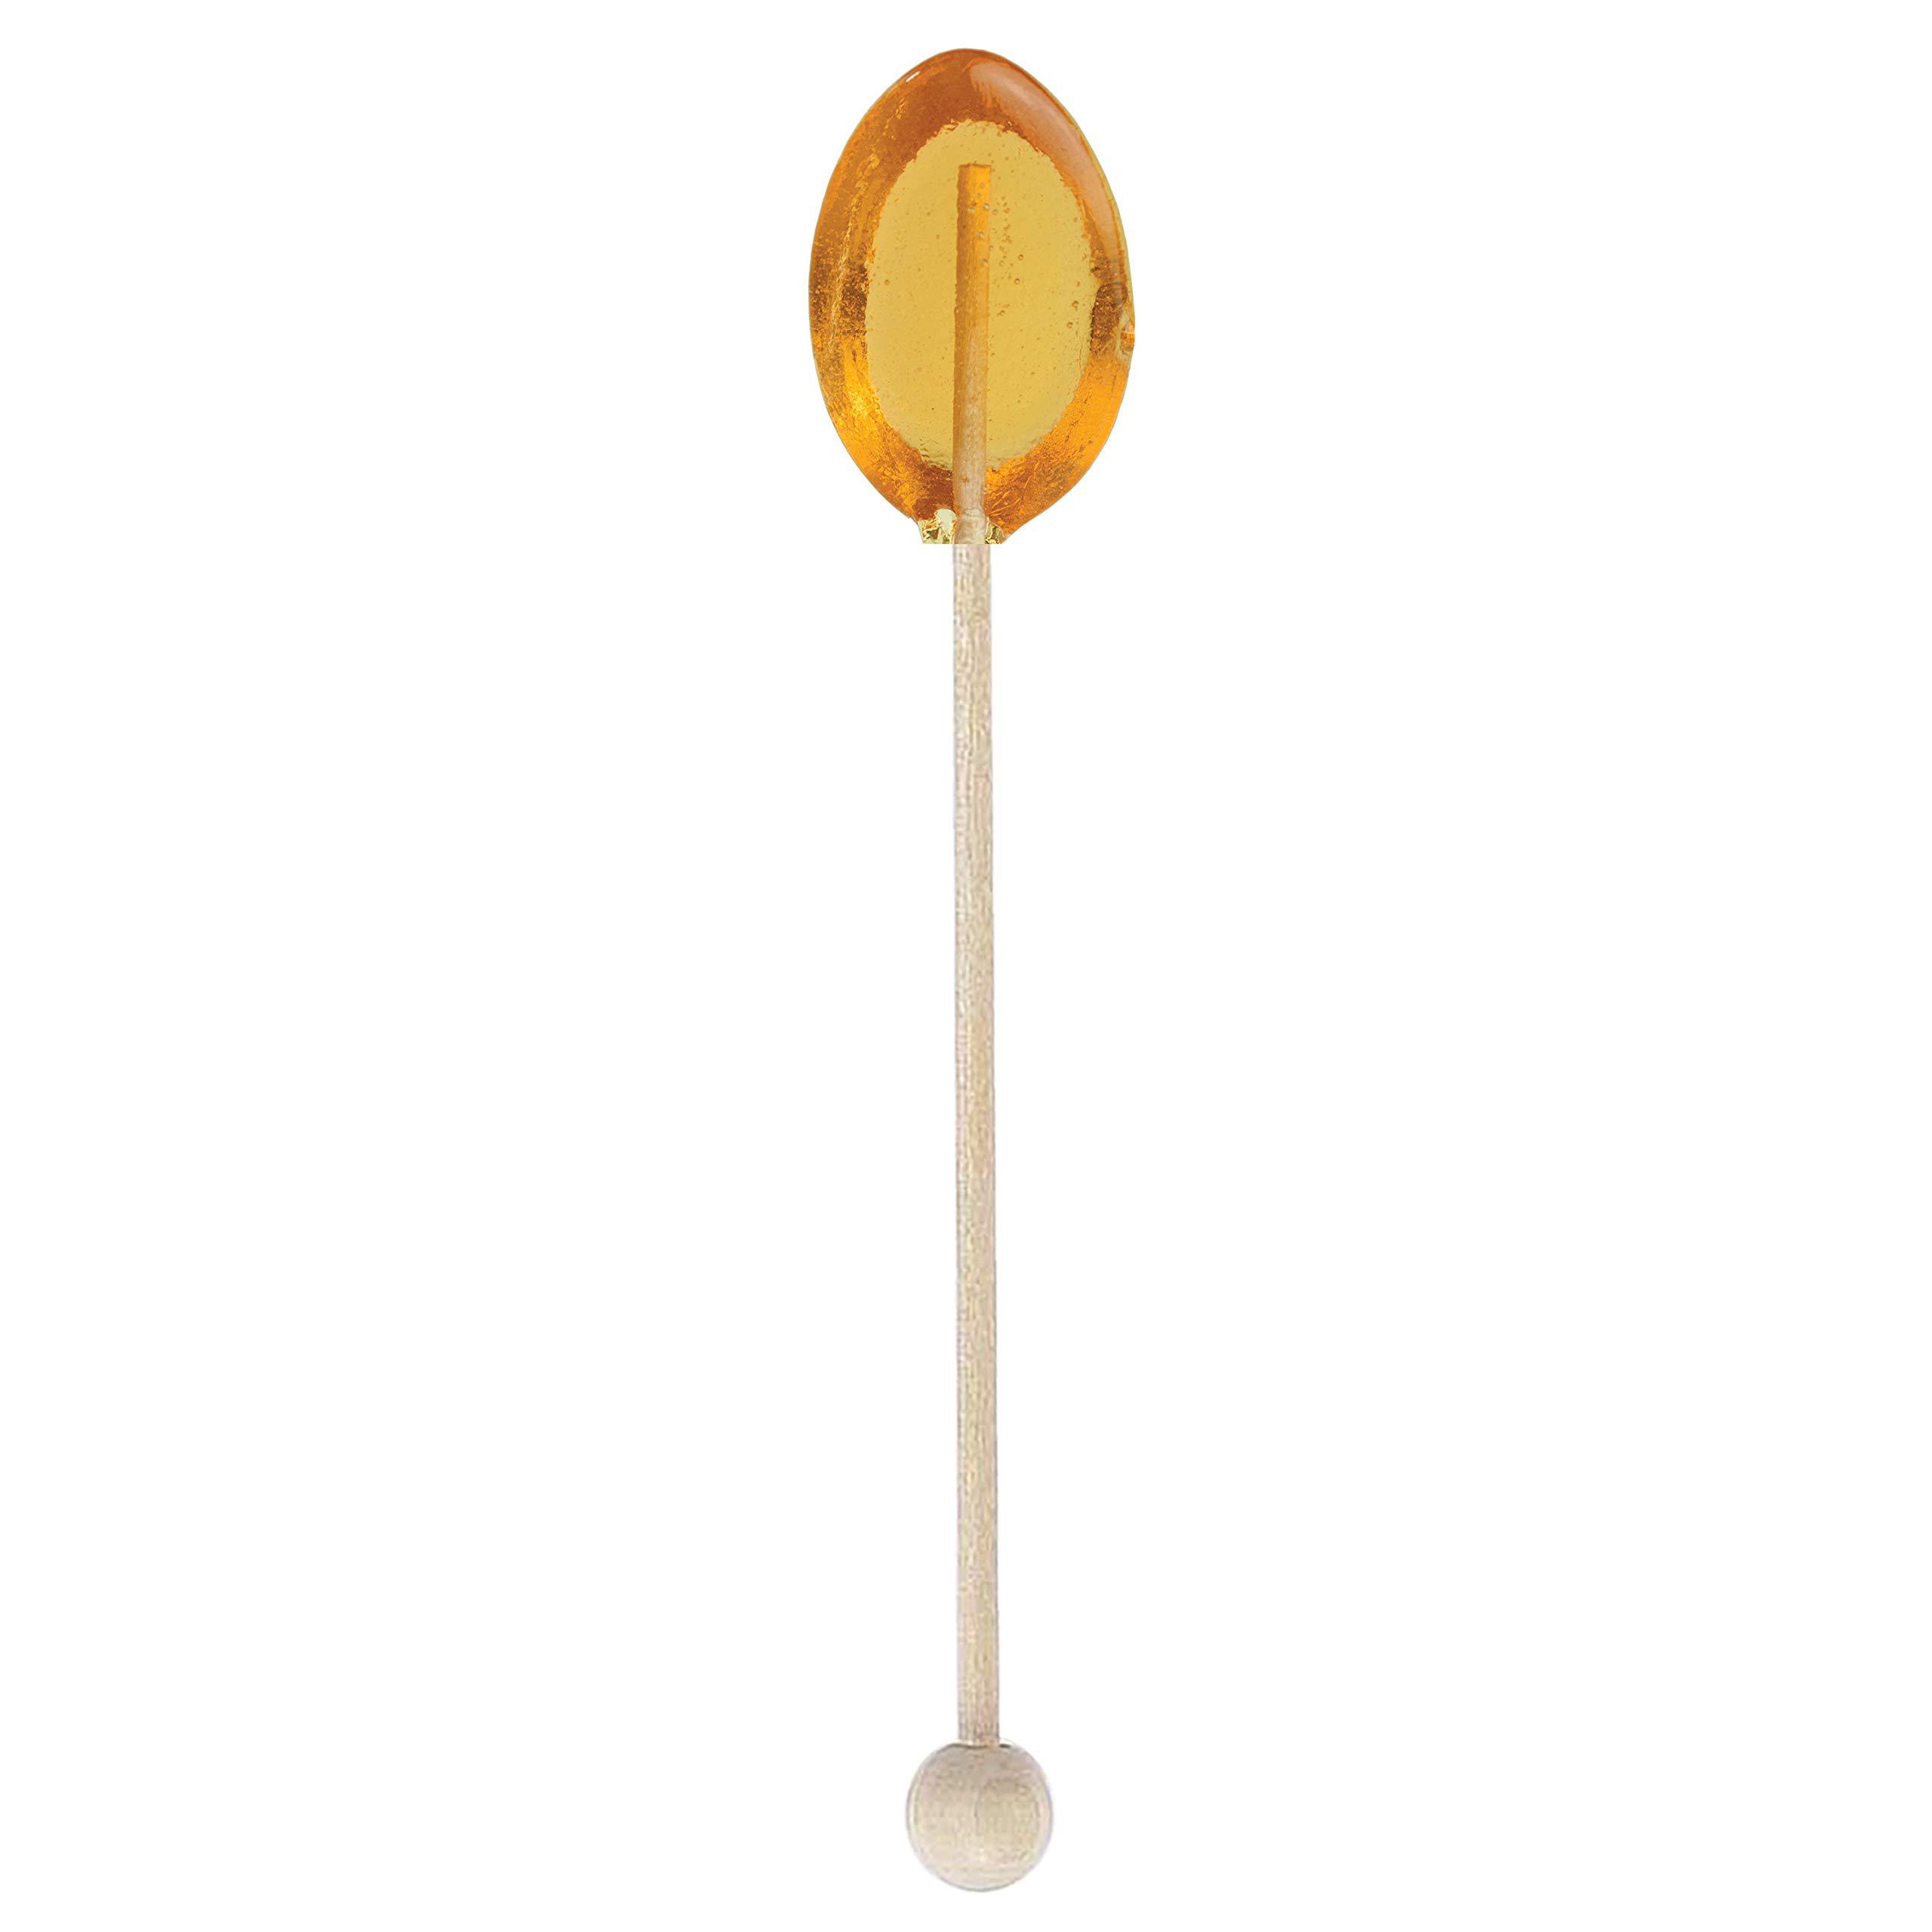 Melville Candy tupelo honey spoon (30 count)